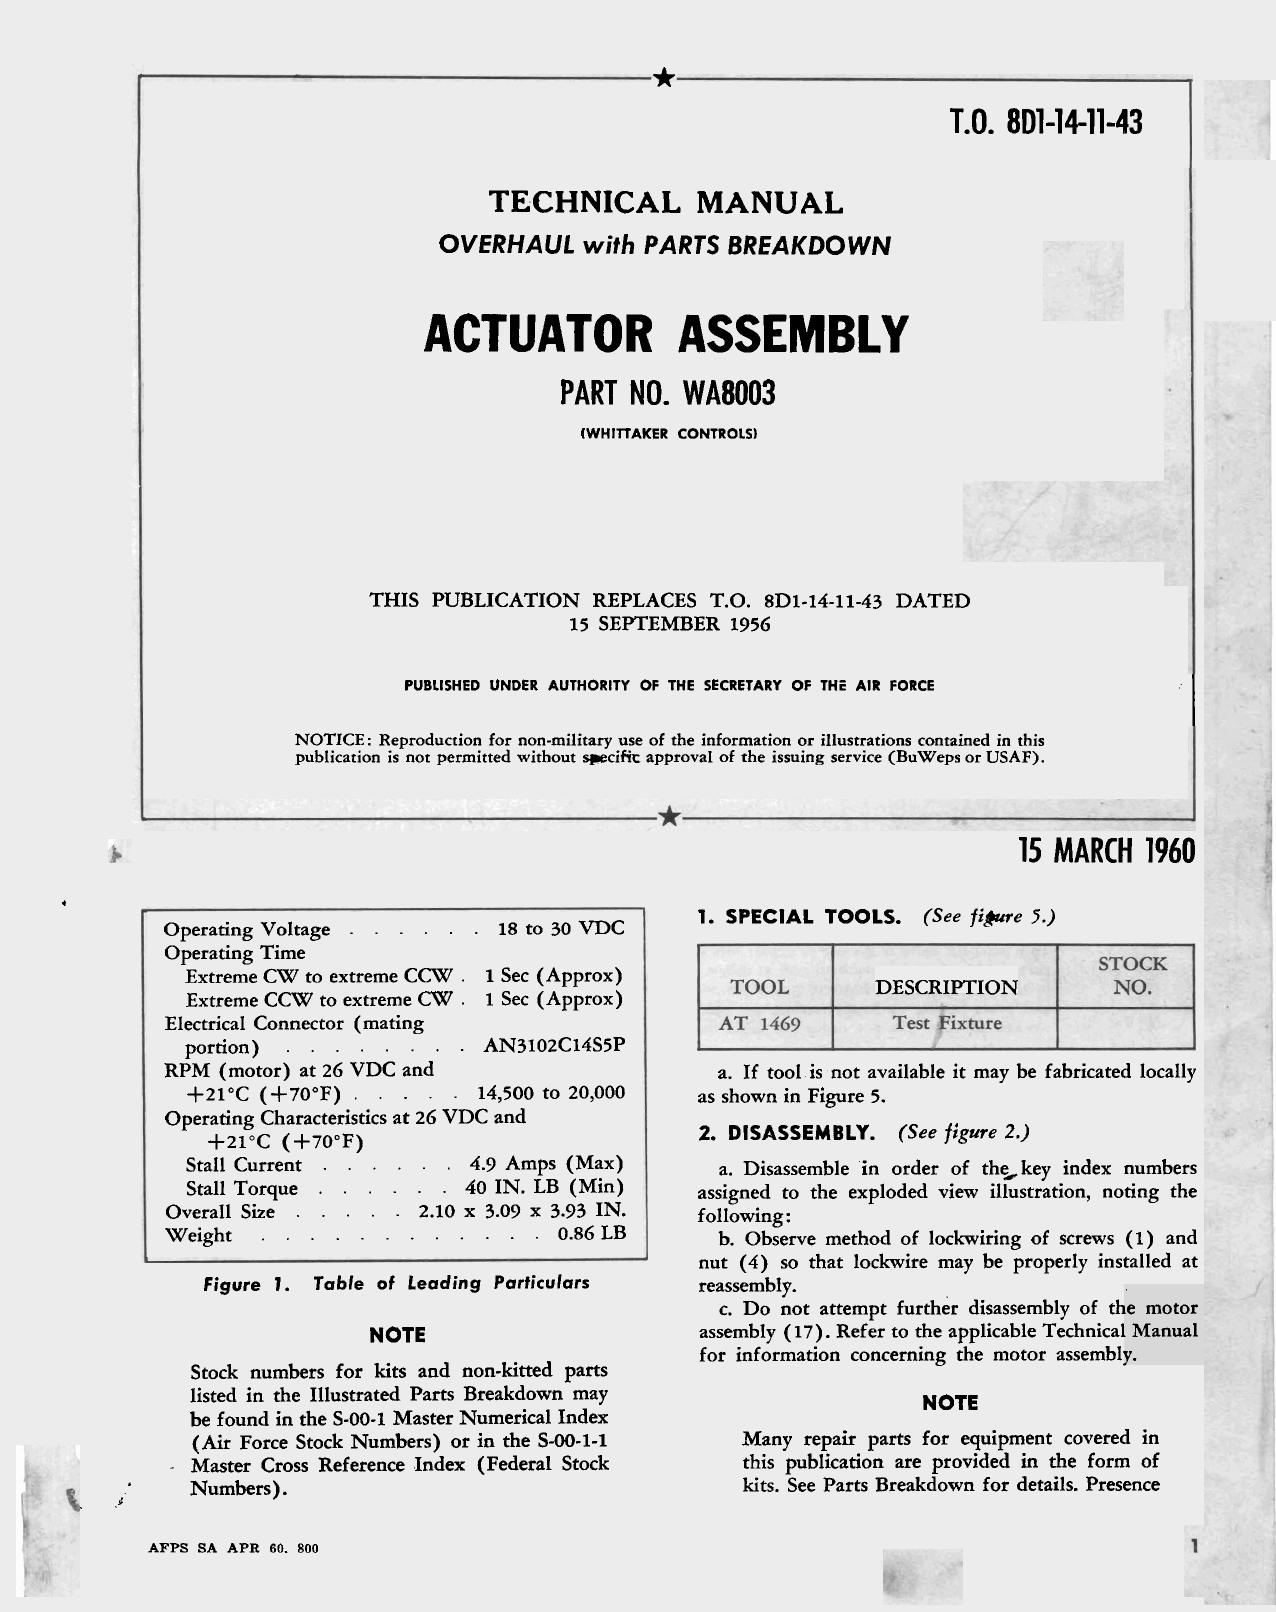 Sample page 1 from AirCorps Library document: Overhaul with Parts Breakdown for Actuator Assembly - Part WA8003